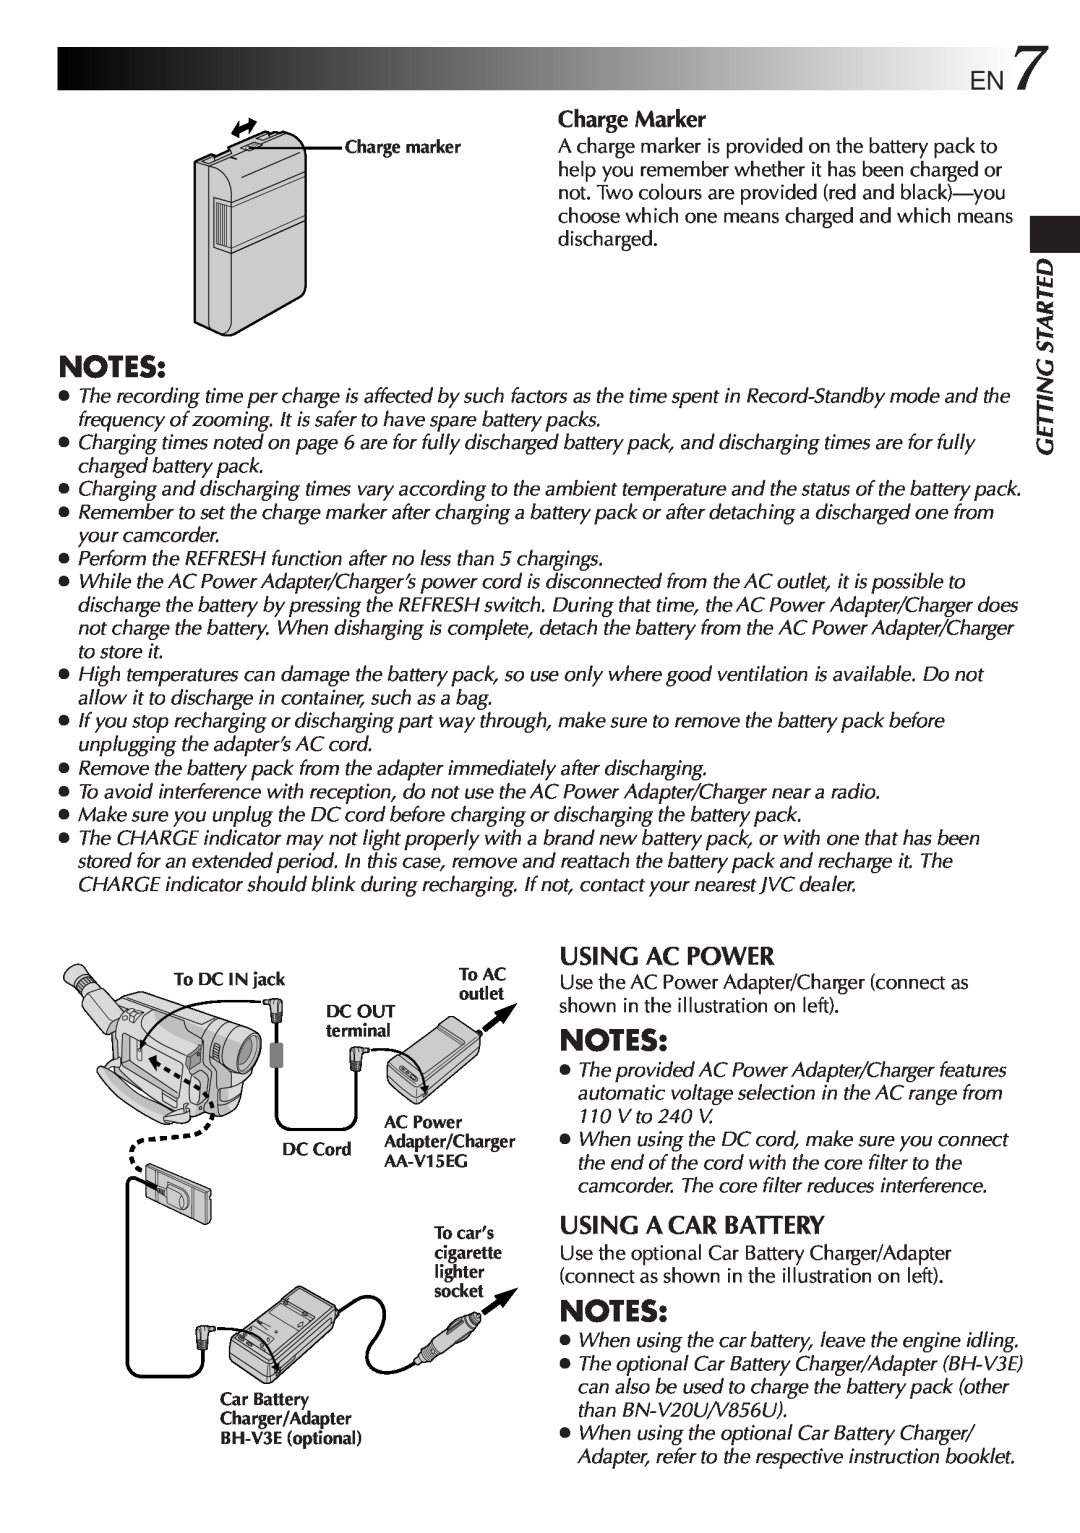 JVC LYT0242-001A manual Using Ac Power, Using A Car Battery, Charge Marker 